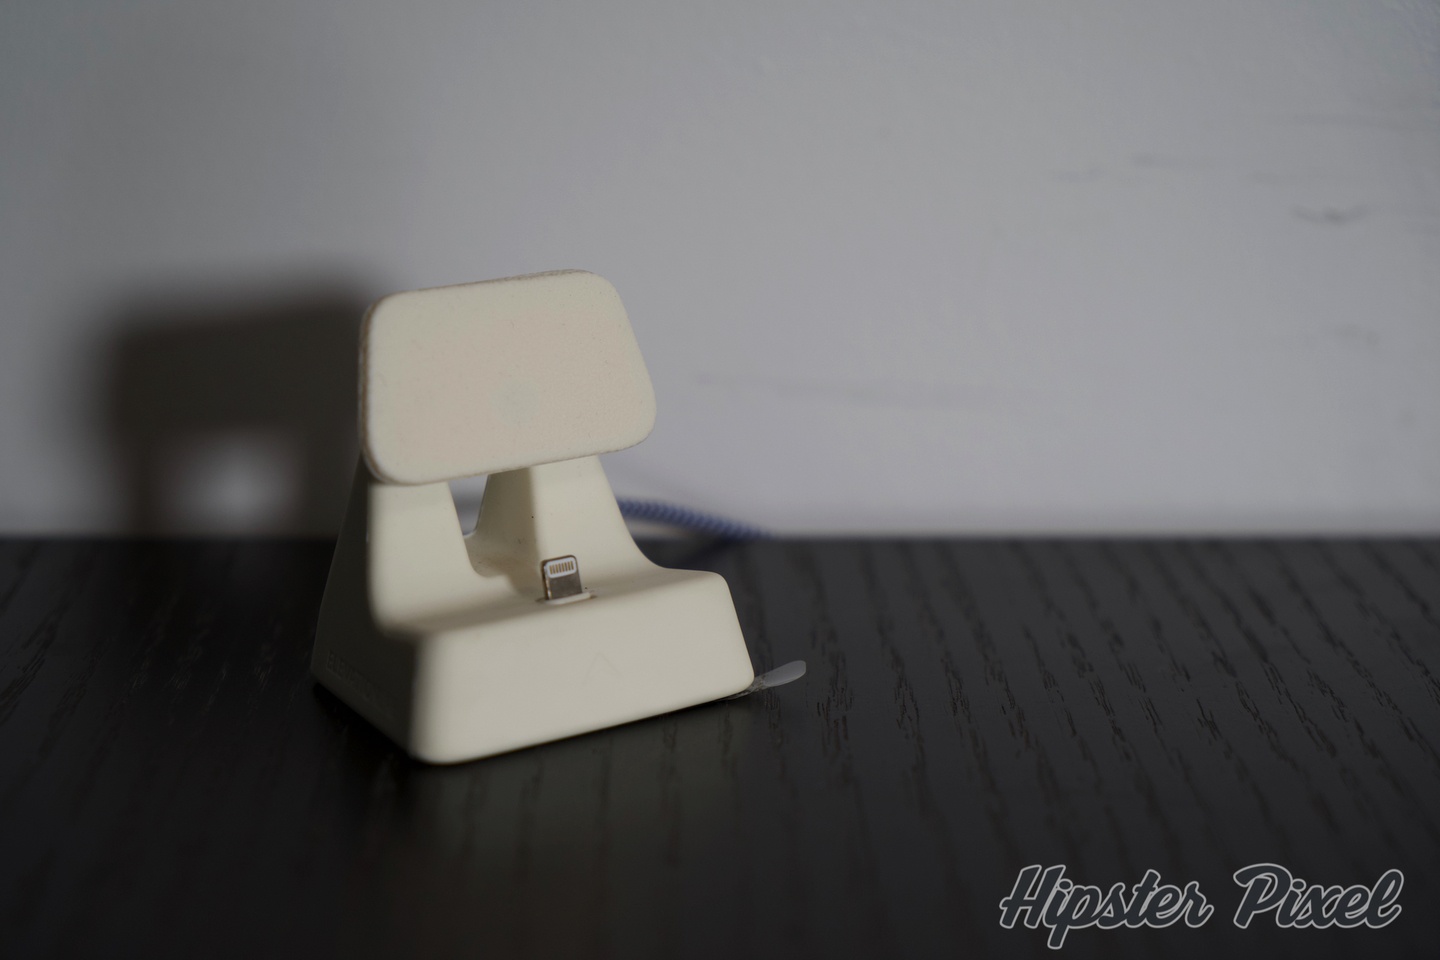 Elevation Dock 4 for iPhone Review